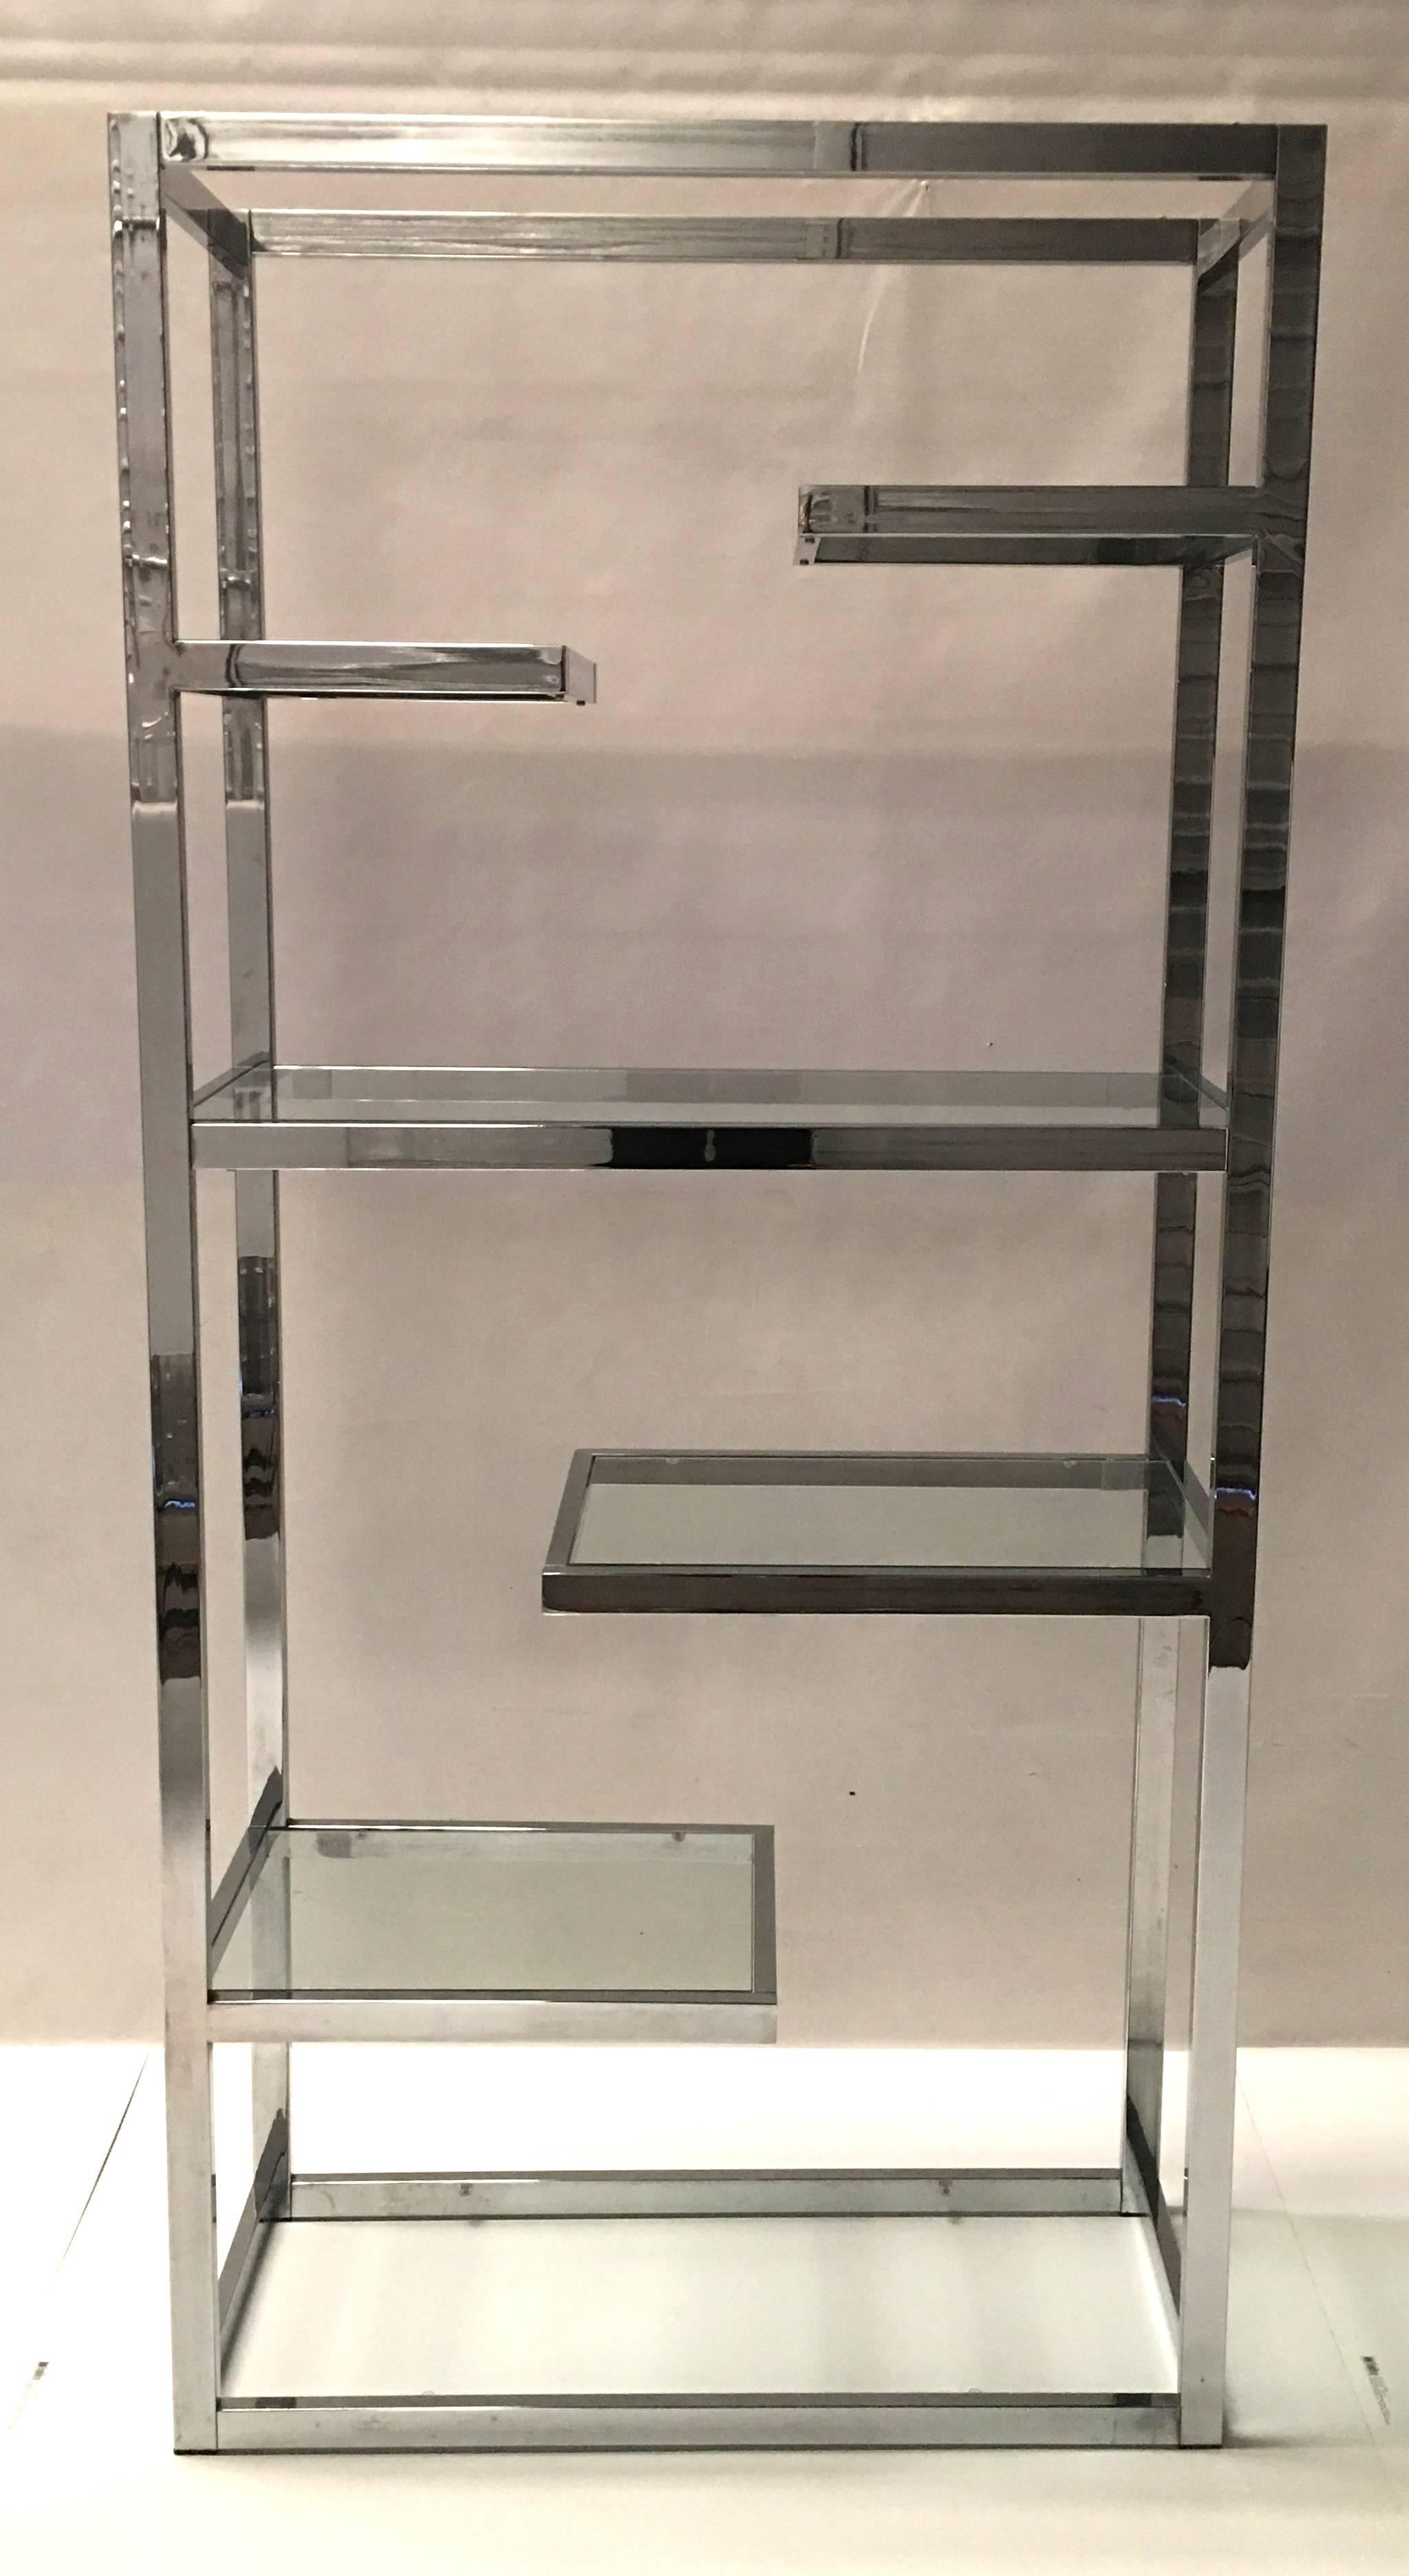 Straight from a modern time capsule interior comes this rarely seen Chrome Etagere by Milo Baughman for Thayer Coggin. Six random width shelves make this a true sculptural statement as well as a versatile storage shelf for books or objects. The